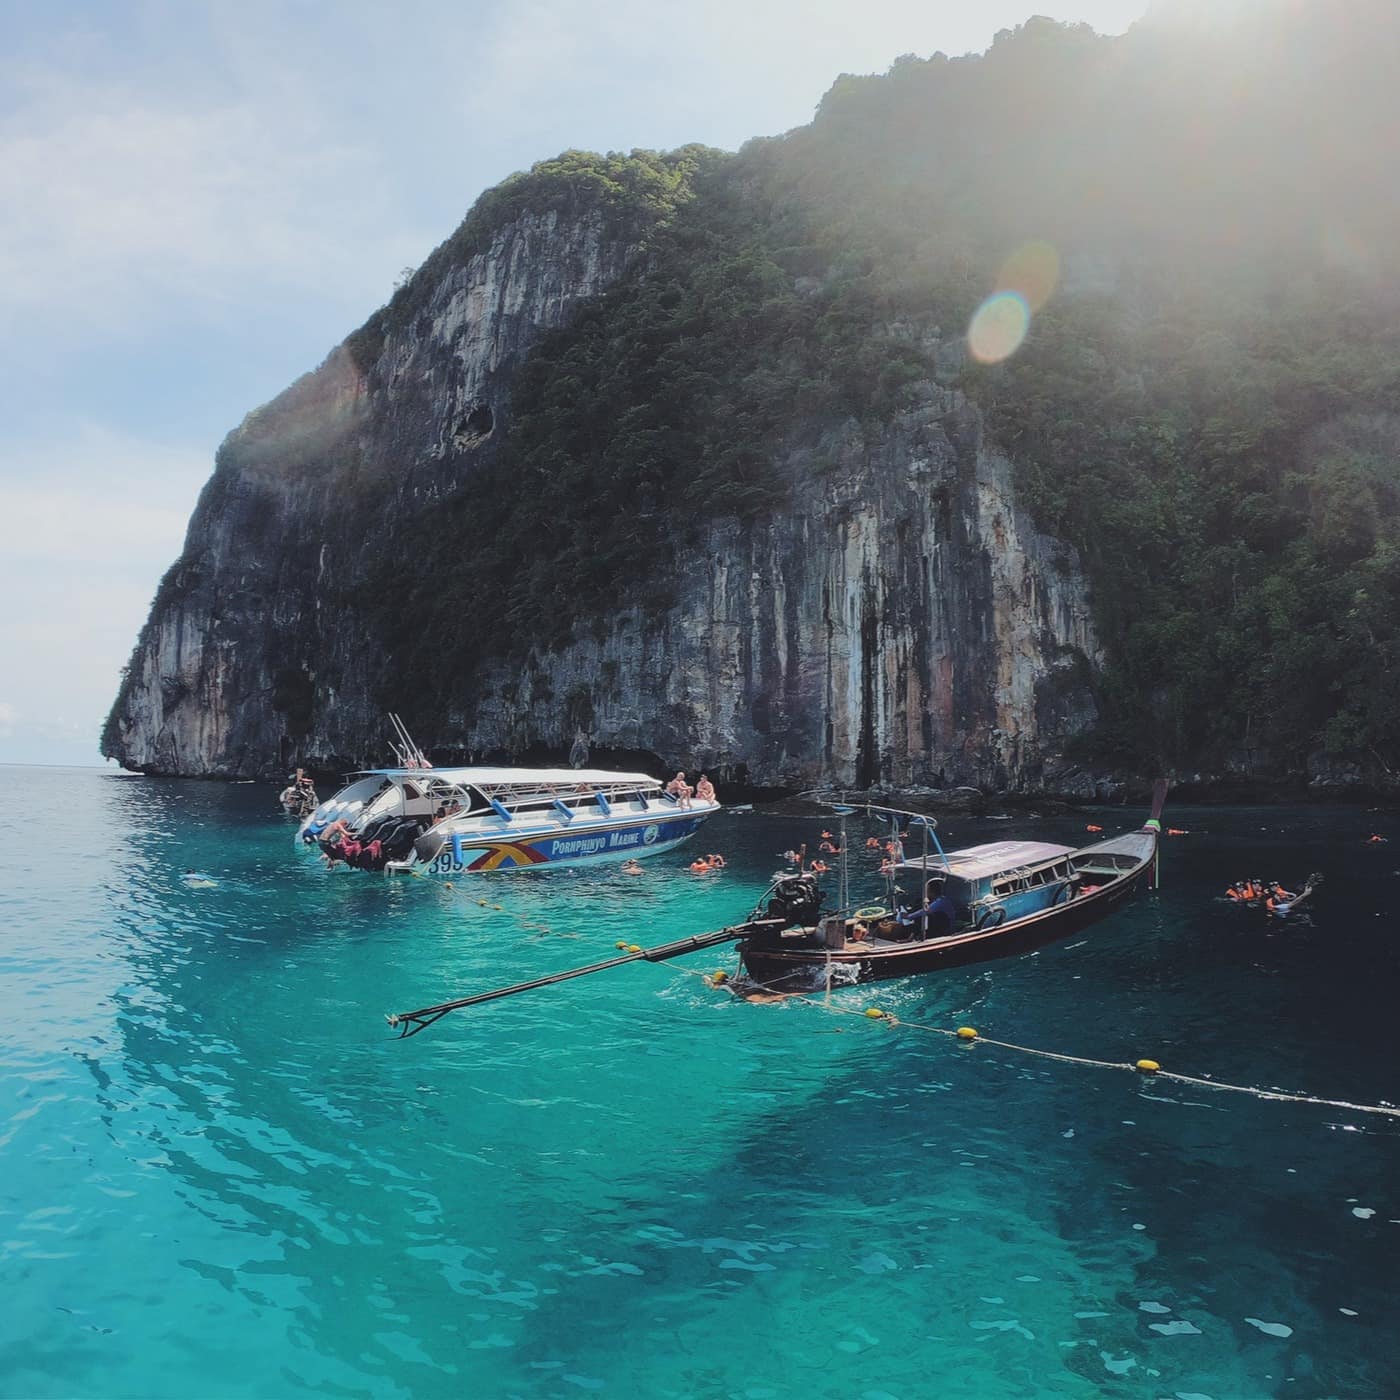 Boats are moored in blue waters by the Phi Phi Islands in Thailand